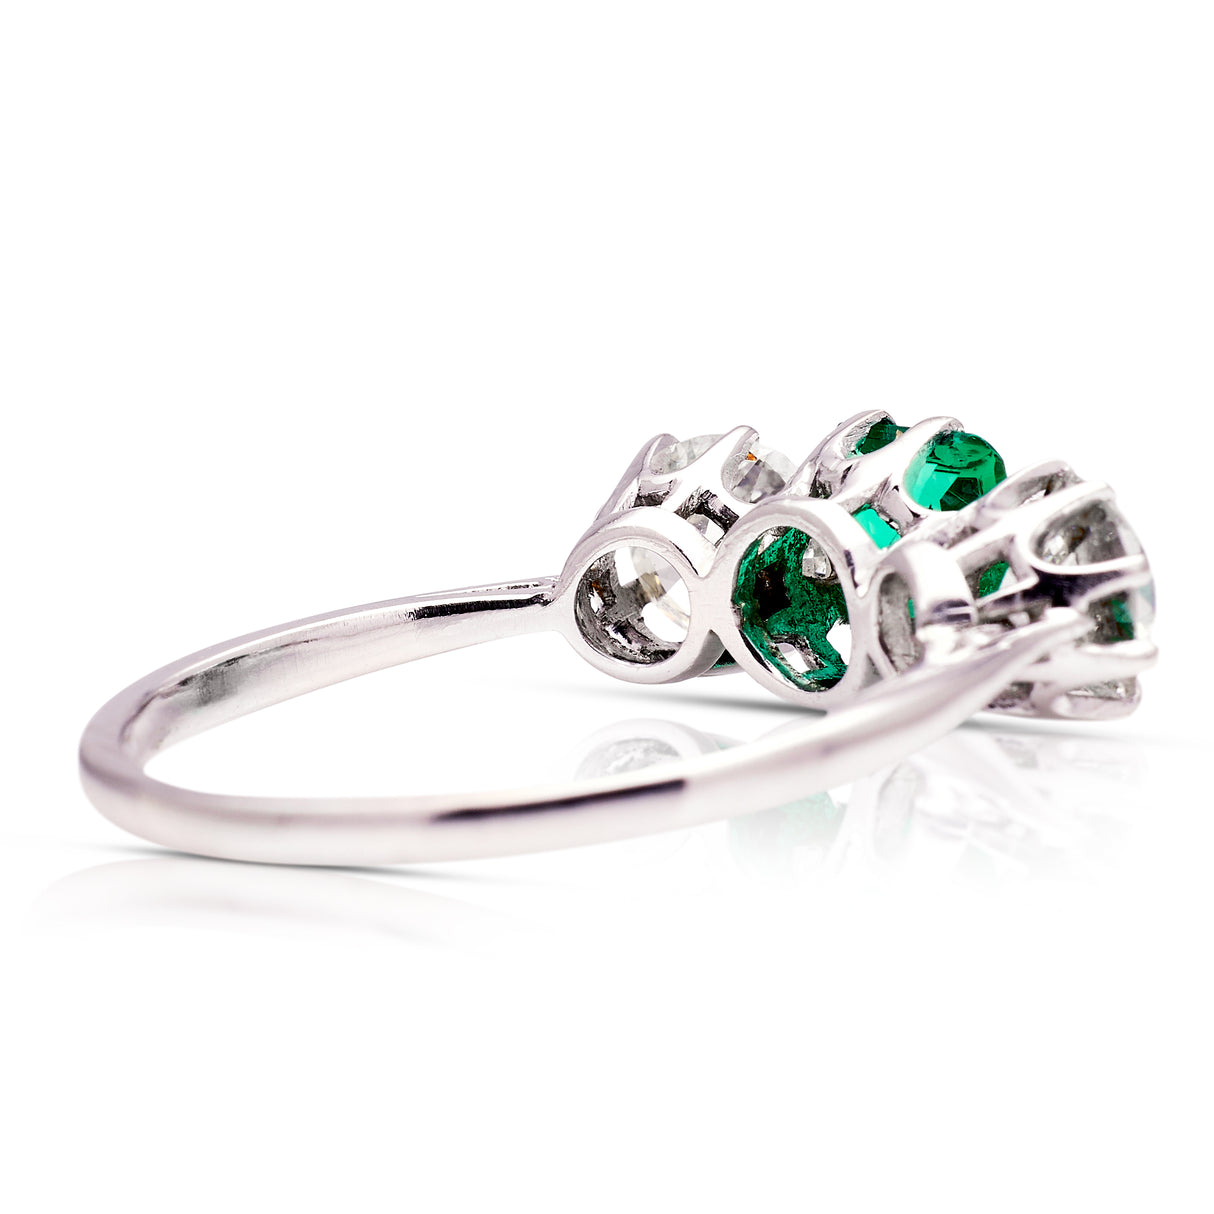 Vintage Art Deco three-stone emerald and diamond engagement ring, rear view. 